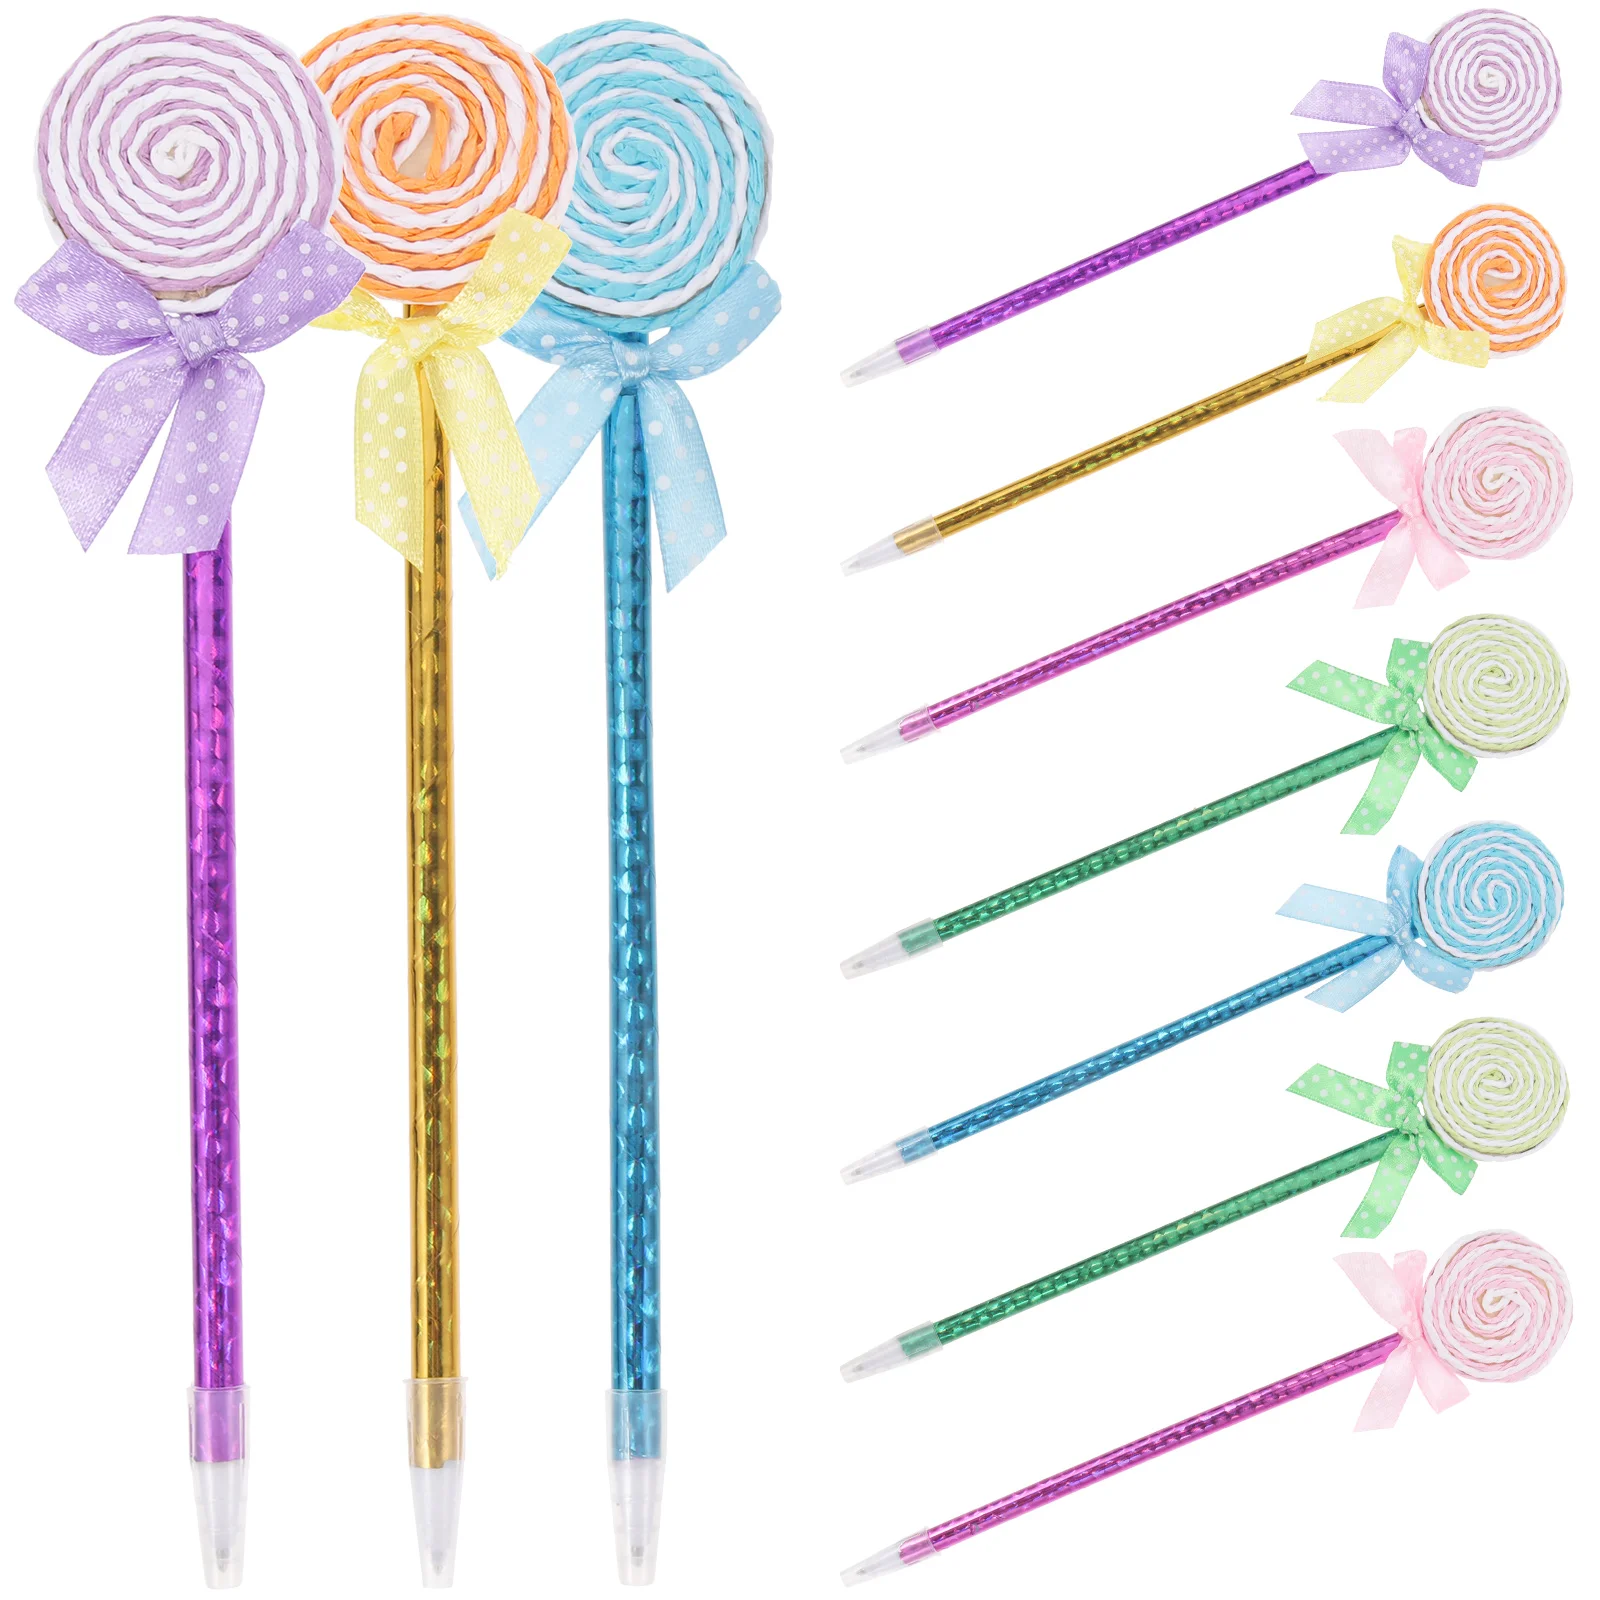 

10pcs Ballpoint Pens Lollipop Writing Pens Novelty Writing Pens Kids Toys for Student Office Kids Creative Gifts ( )